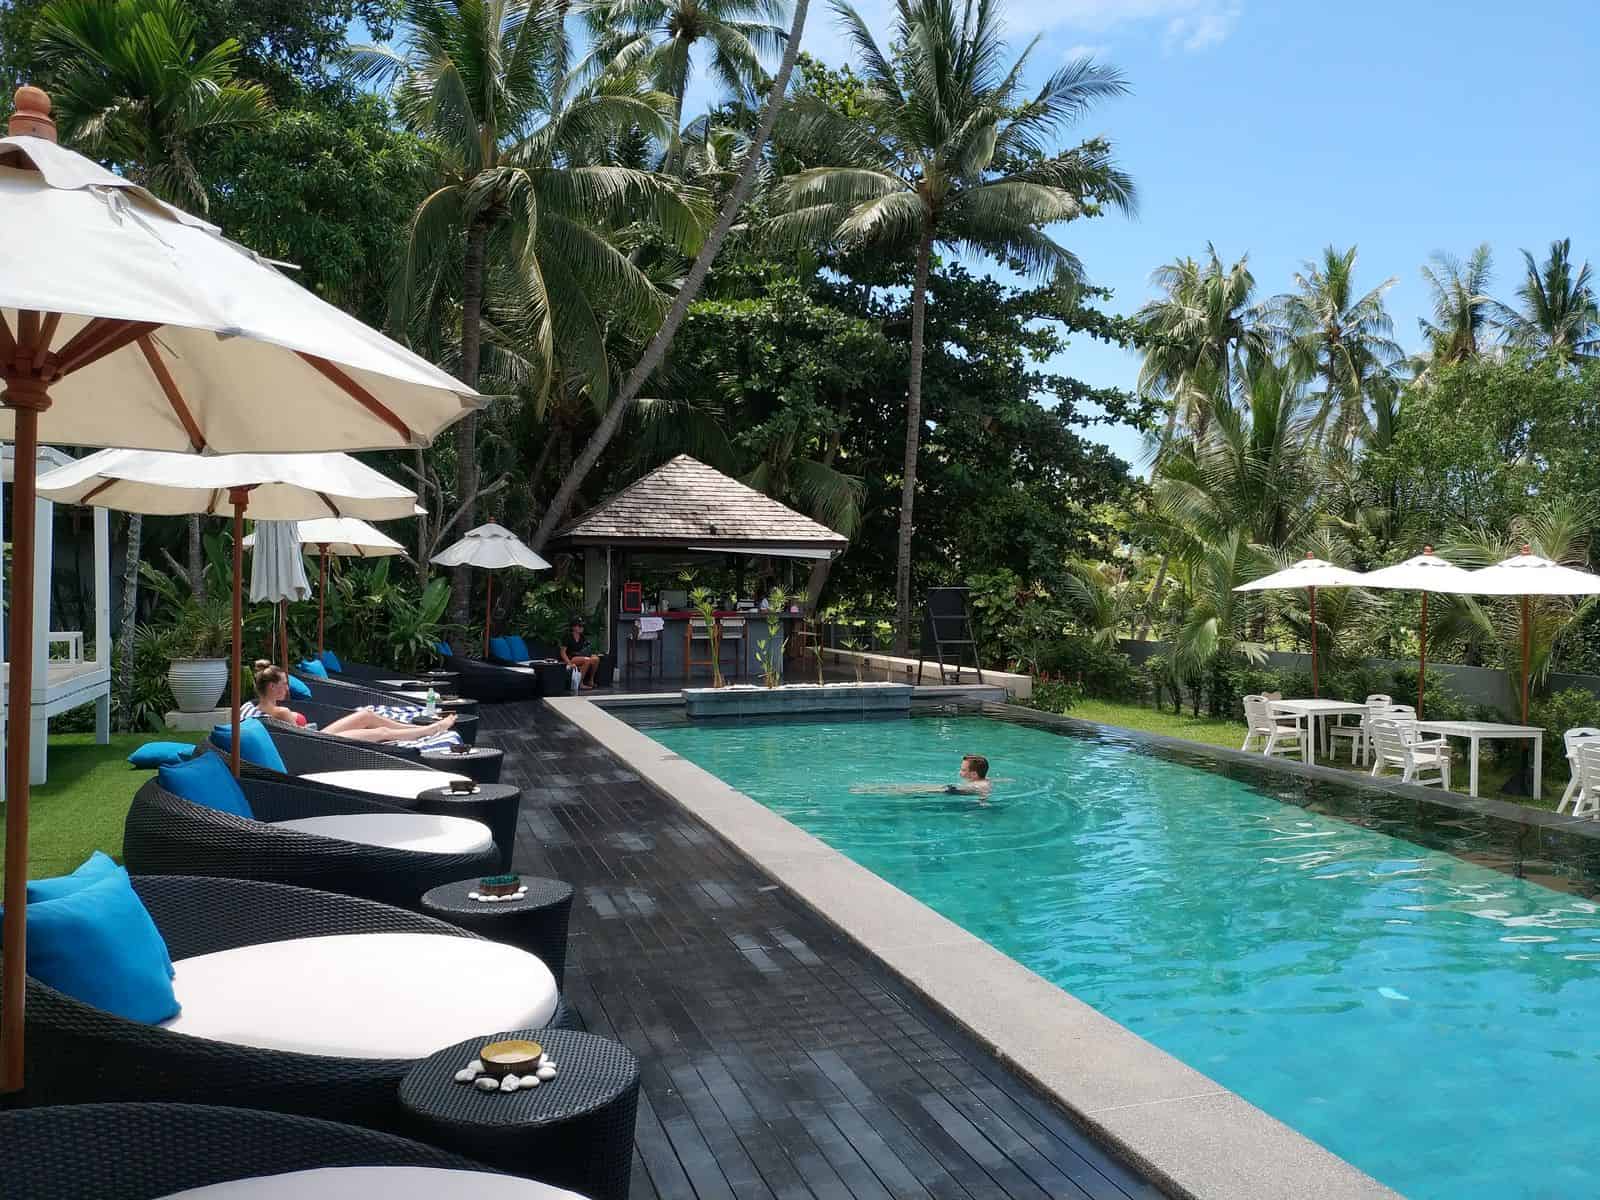 Koh Samui Resorts - 5 Star Pool, Beach Deals & Inclusive Packages Map